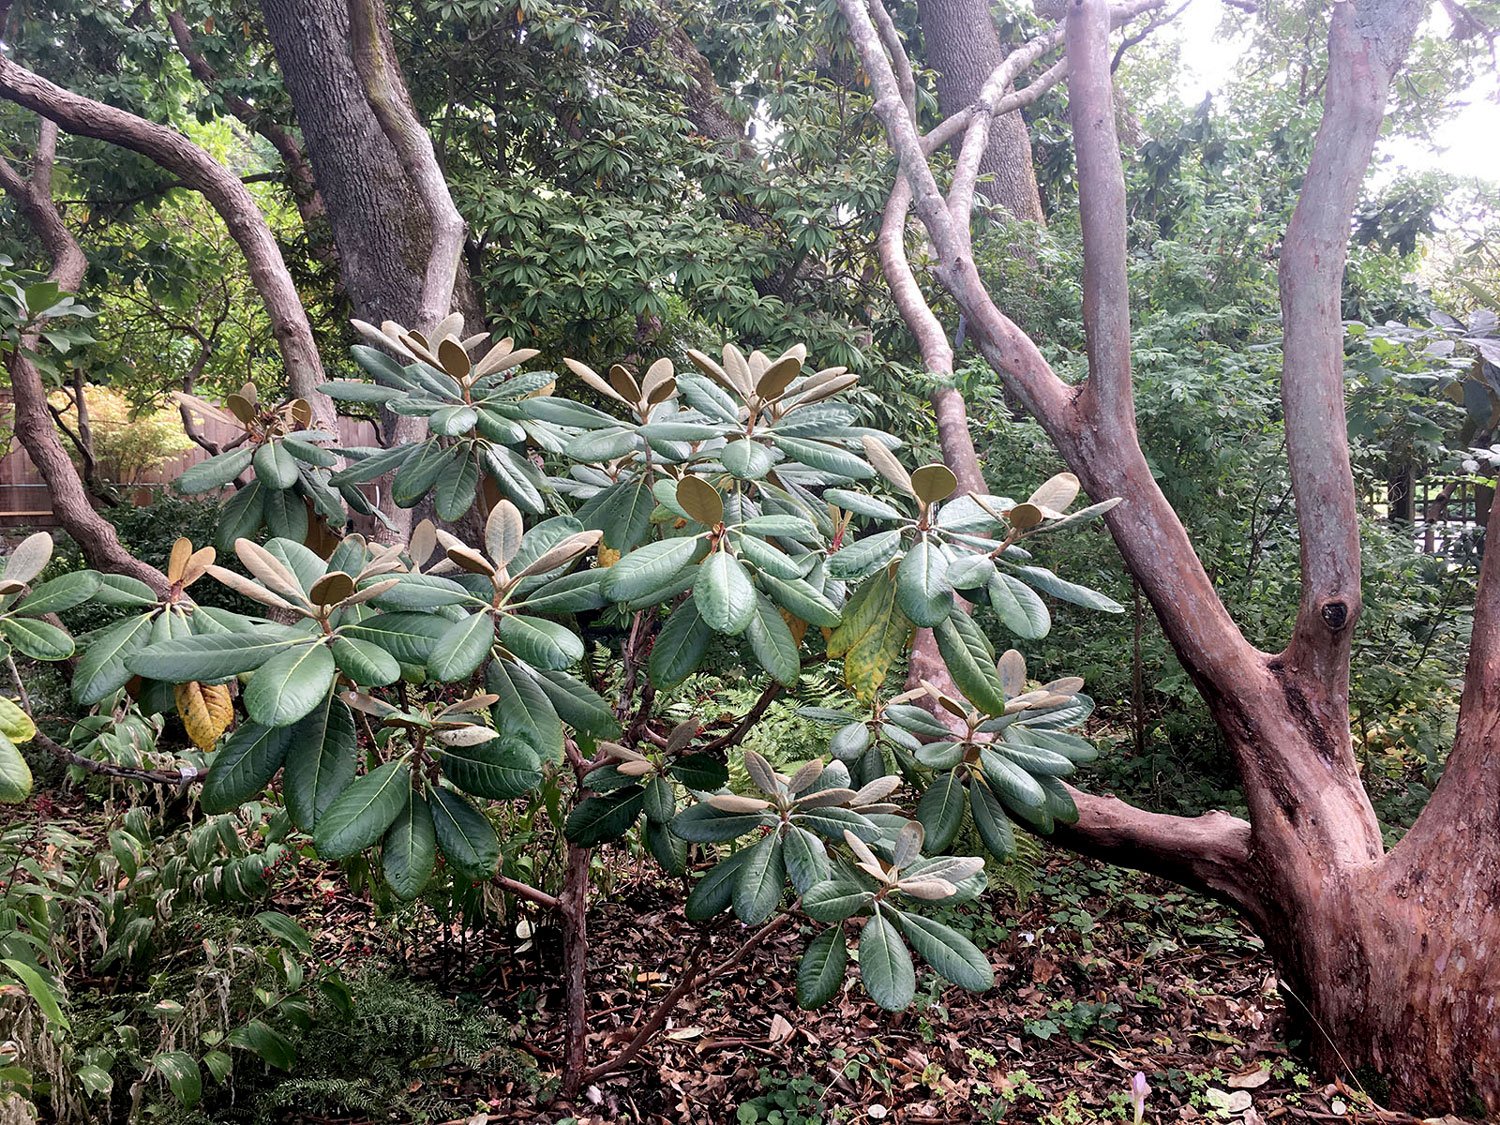 An ideal "forest floor" environment for rhododendrons